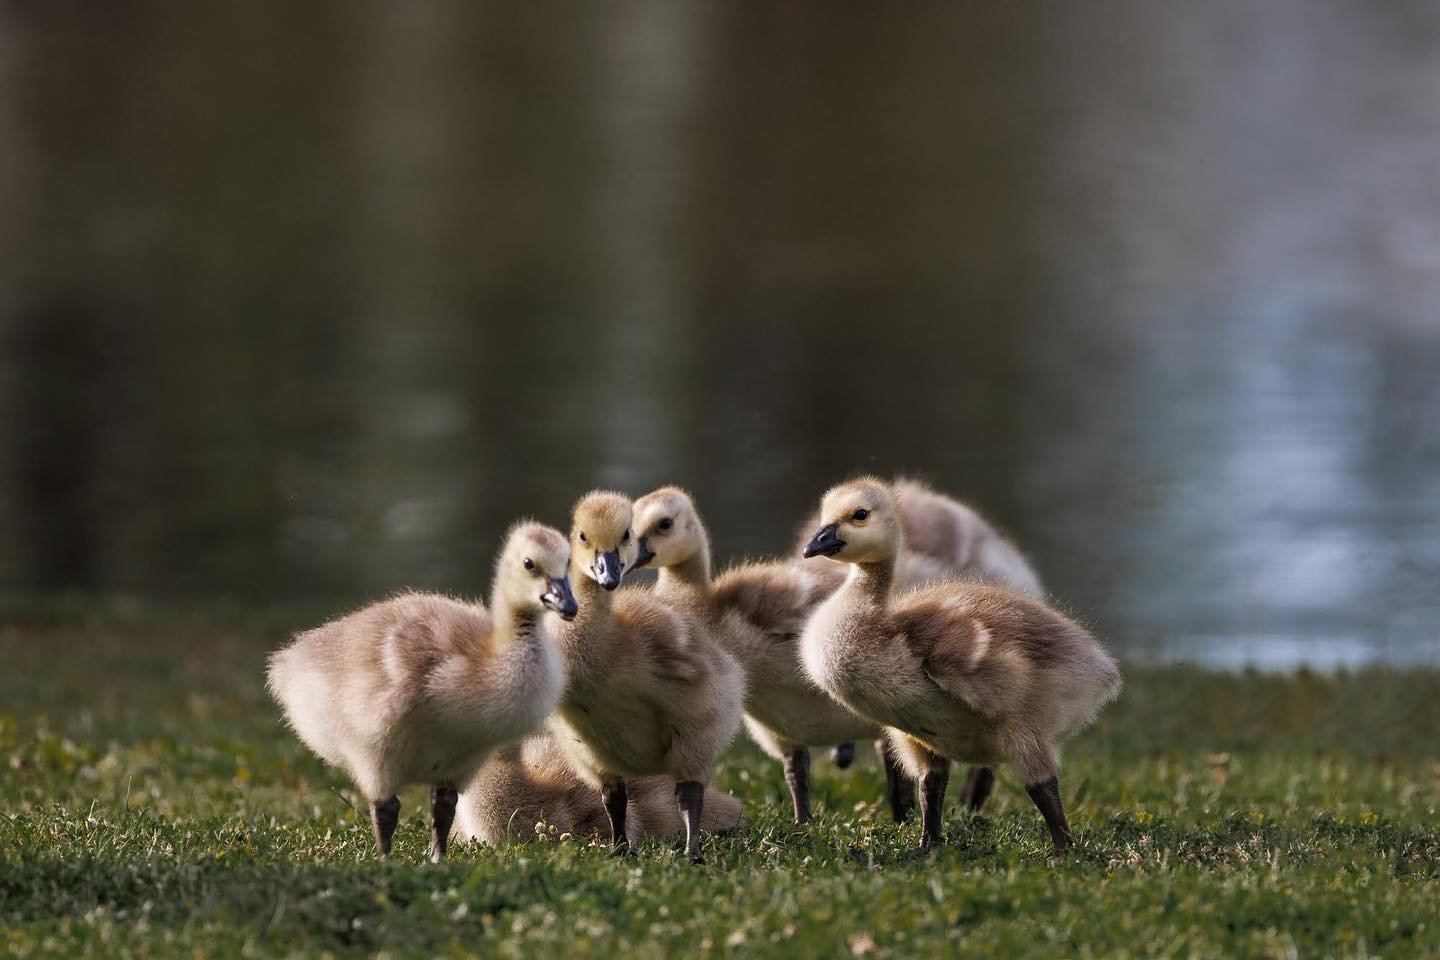 The babies are here! Canada geese parents are ultra attentive and the goslings are very busy. So sweet!

#bestoftgeglobe_nature #bns_nature #fiftyshades_of_nature #rebels_nature #nb_nature_brilliance #everything_imaginable #picturetokeep_nature #allk